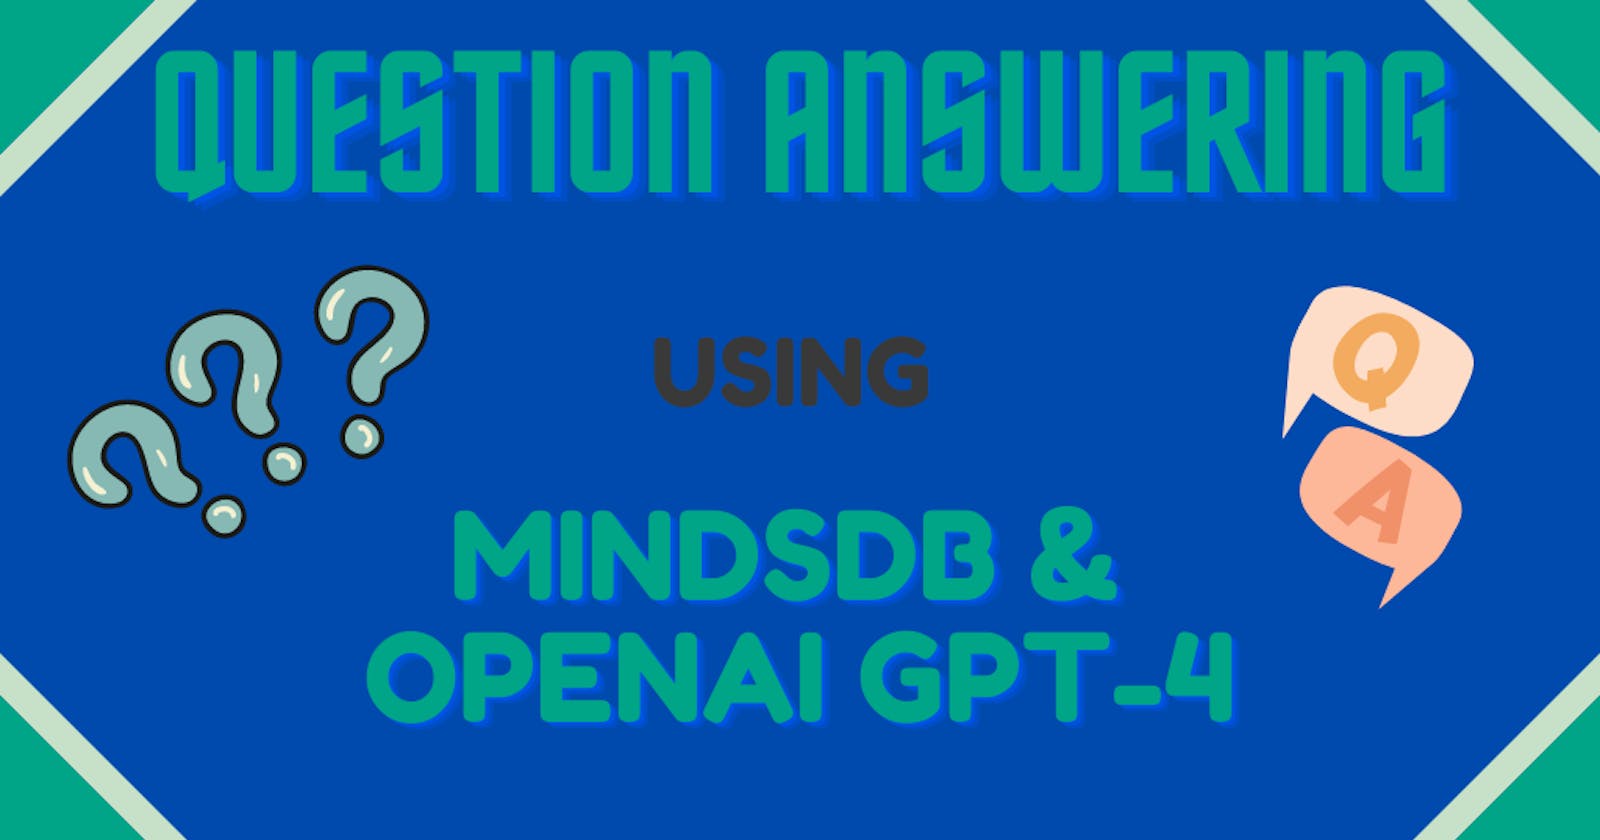 Question Answering using MindsDB and OpenAI GPT-4